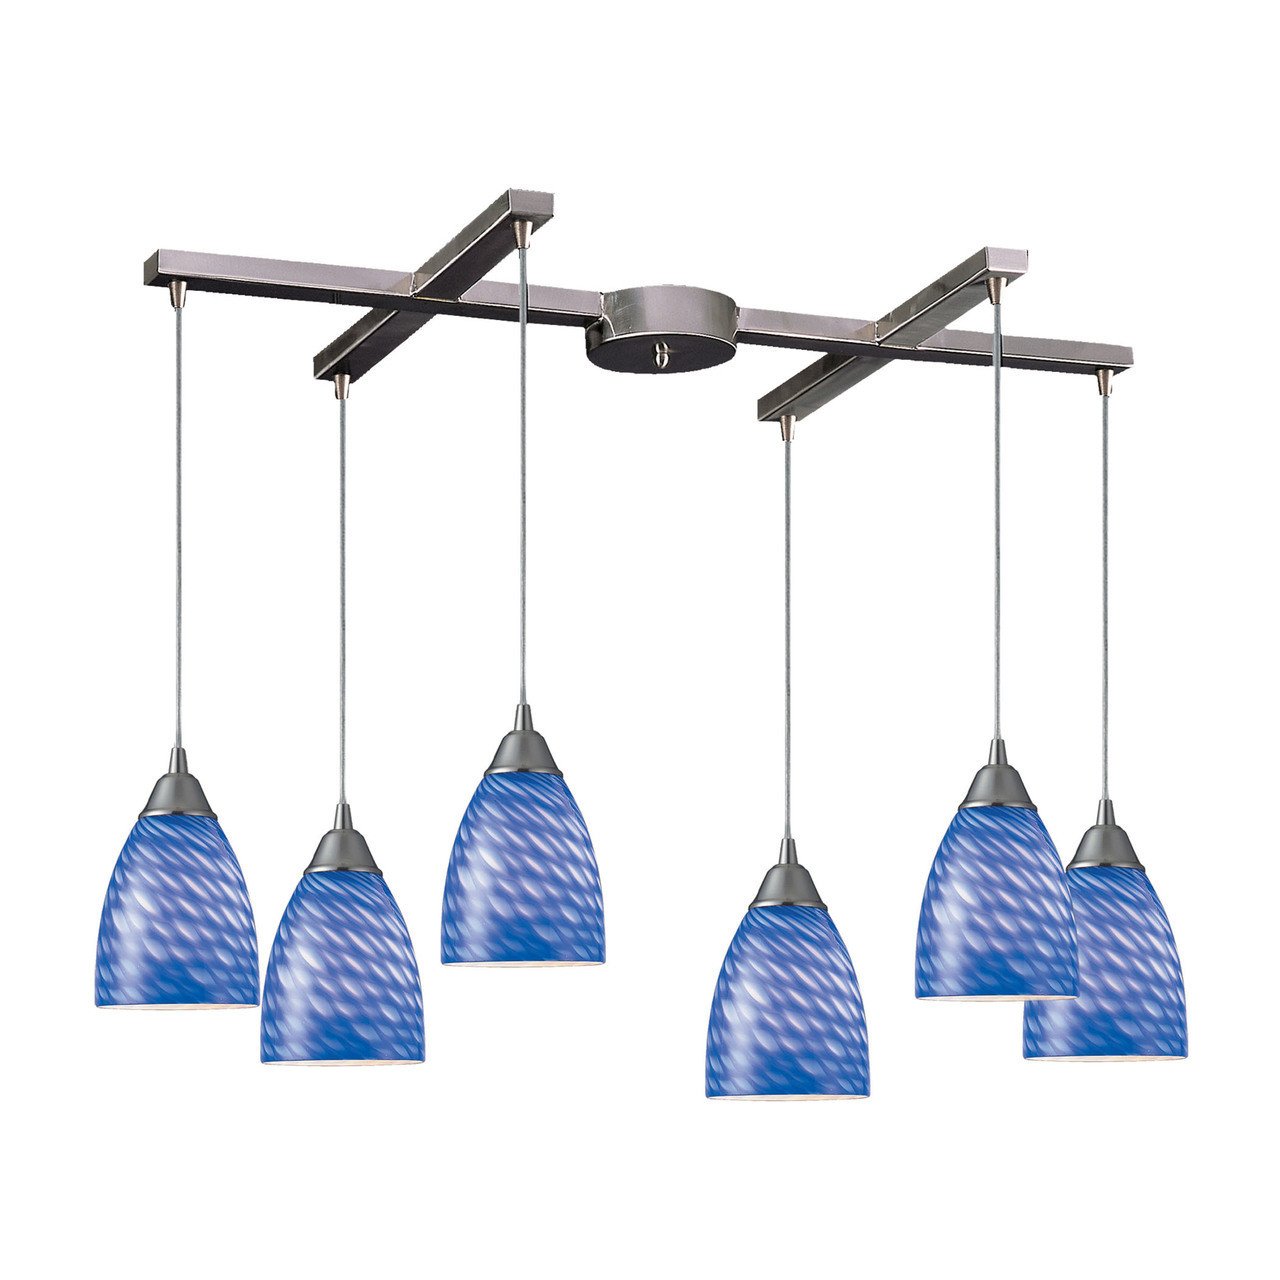 Elk Lighting, Inc. New Product ELK Lighting The Arco Baleno 6 Light Pendant In Satin Nickel And Sapphire Glass 416-6S Sold By VaasuHomes